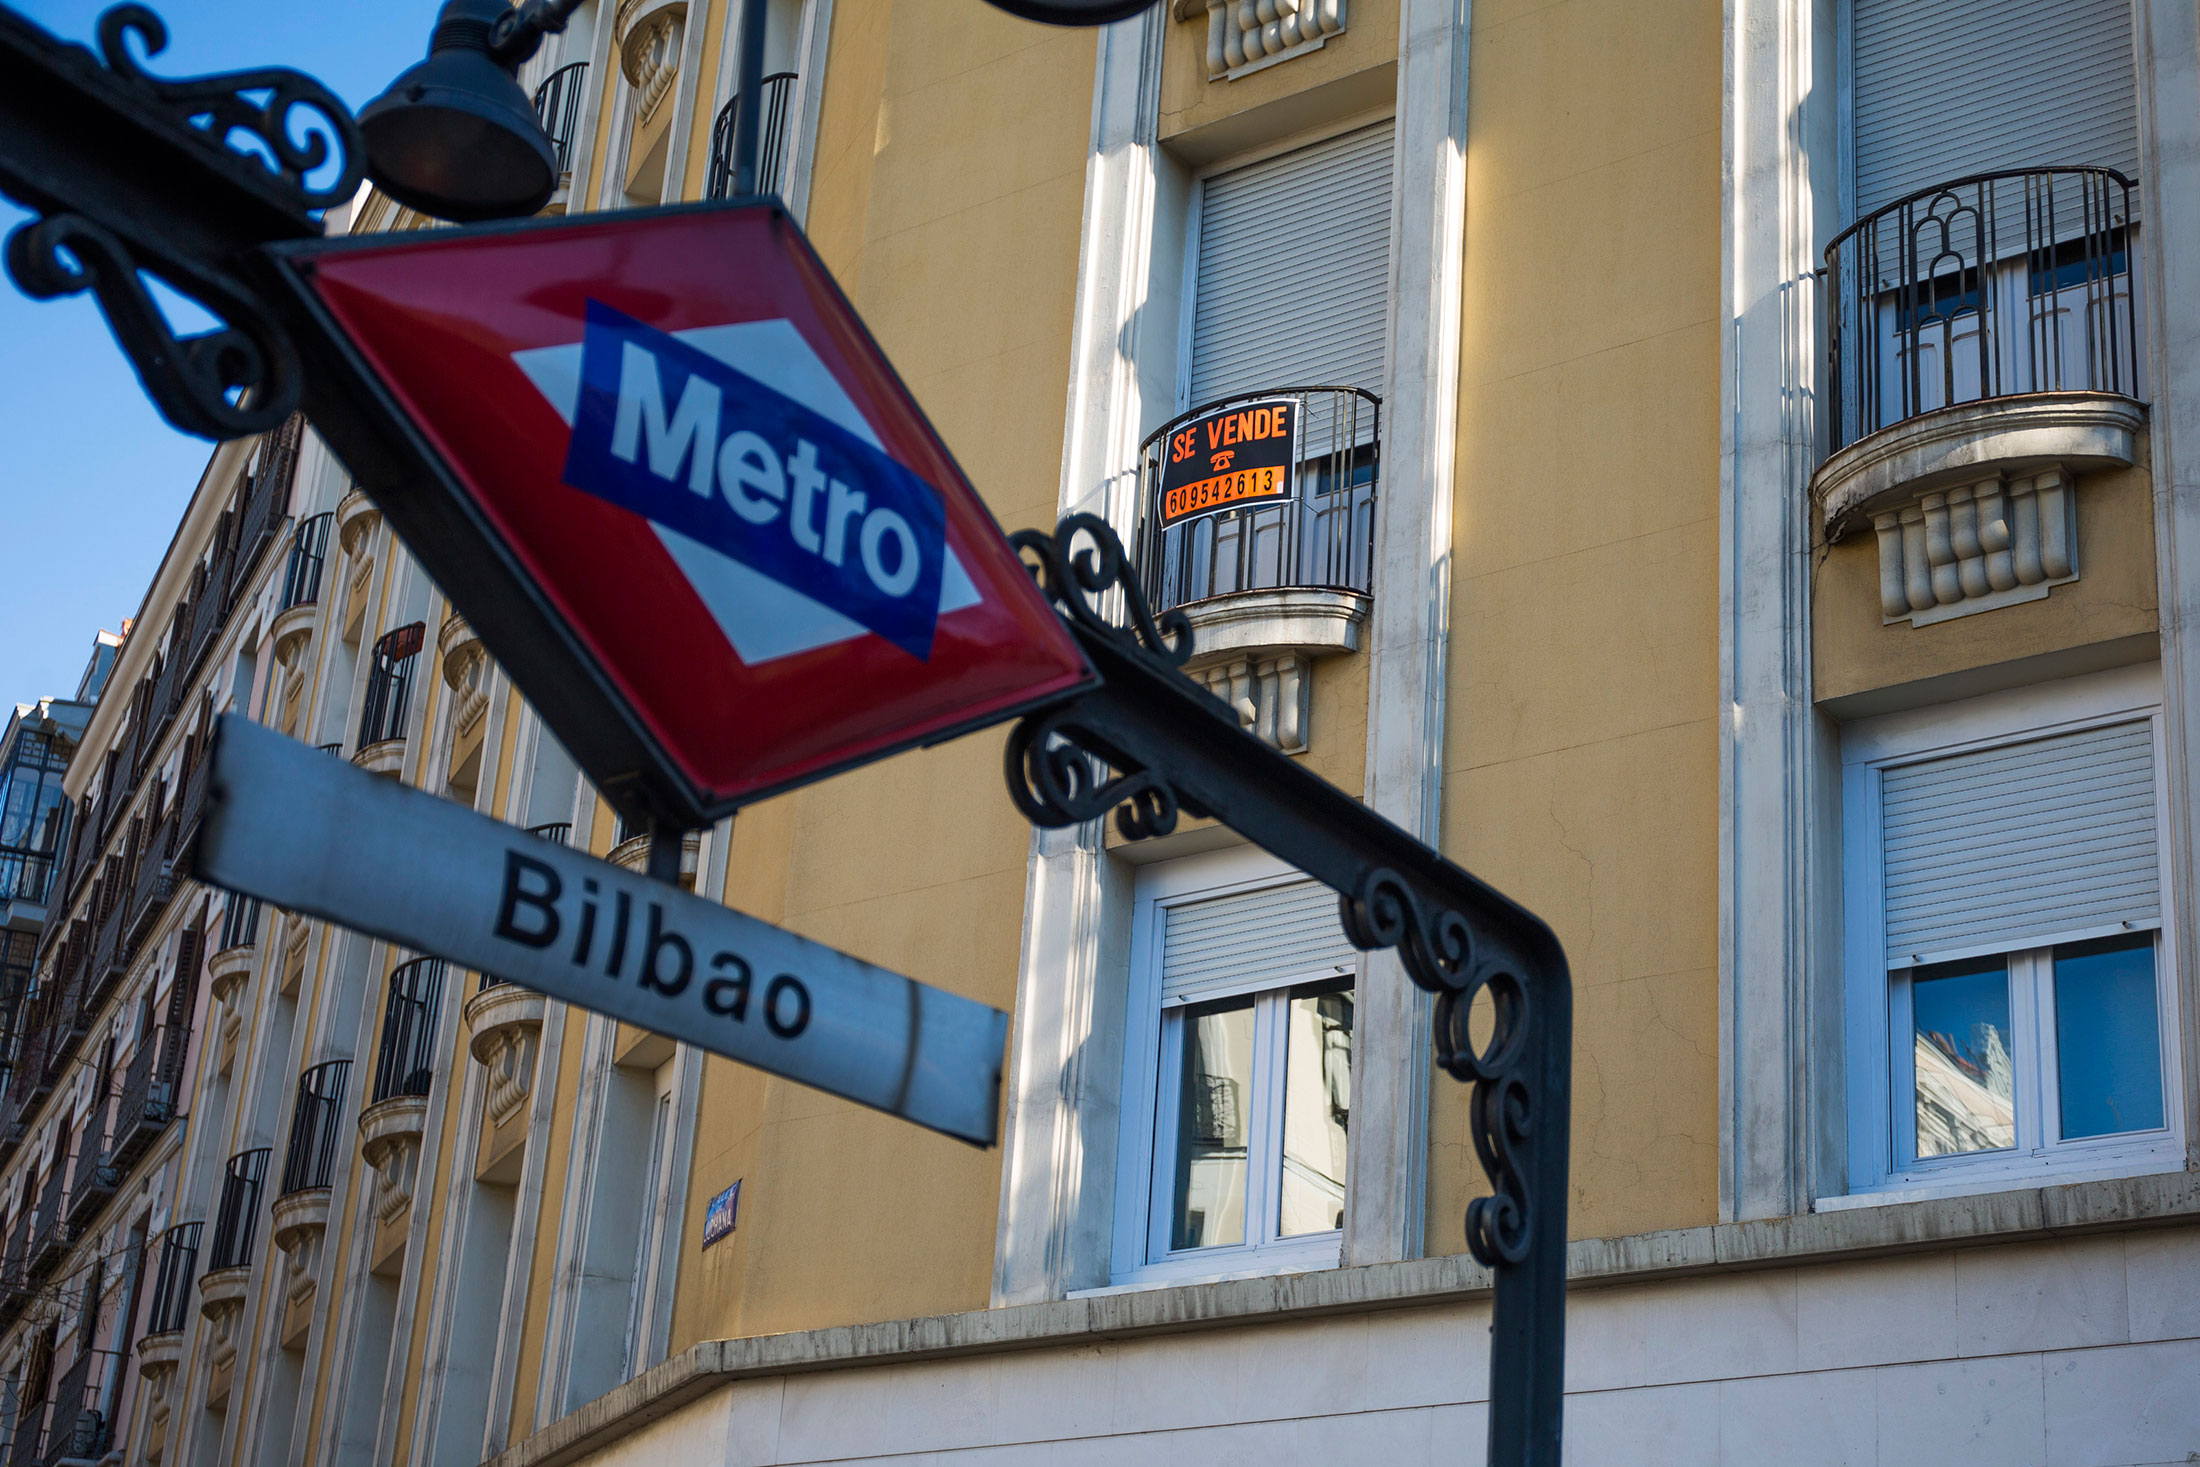 A sale sign near Bilbao metro station in Madrid.
